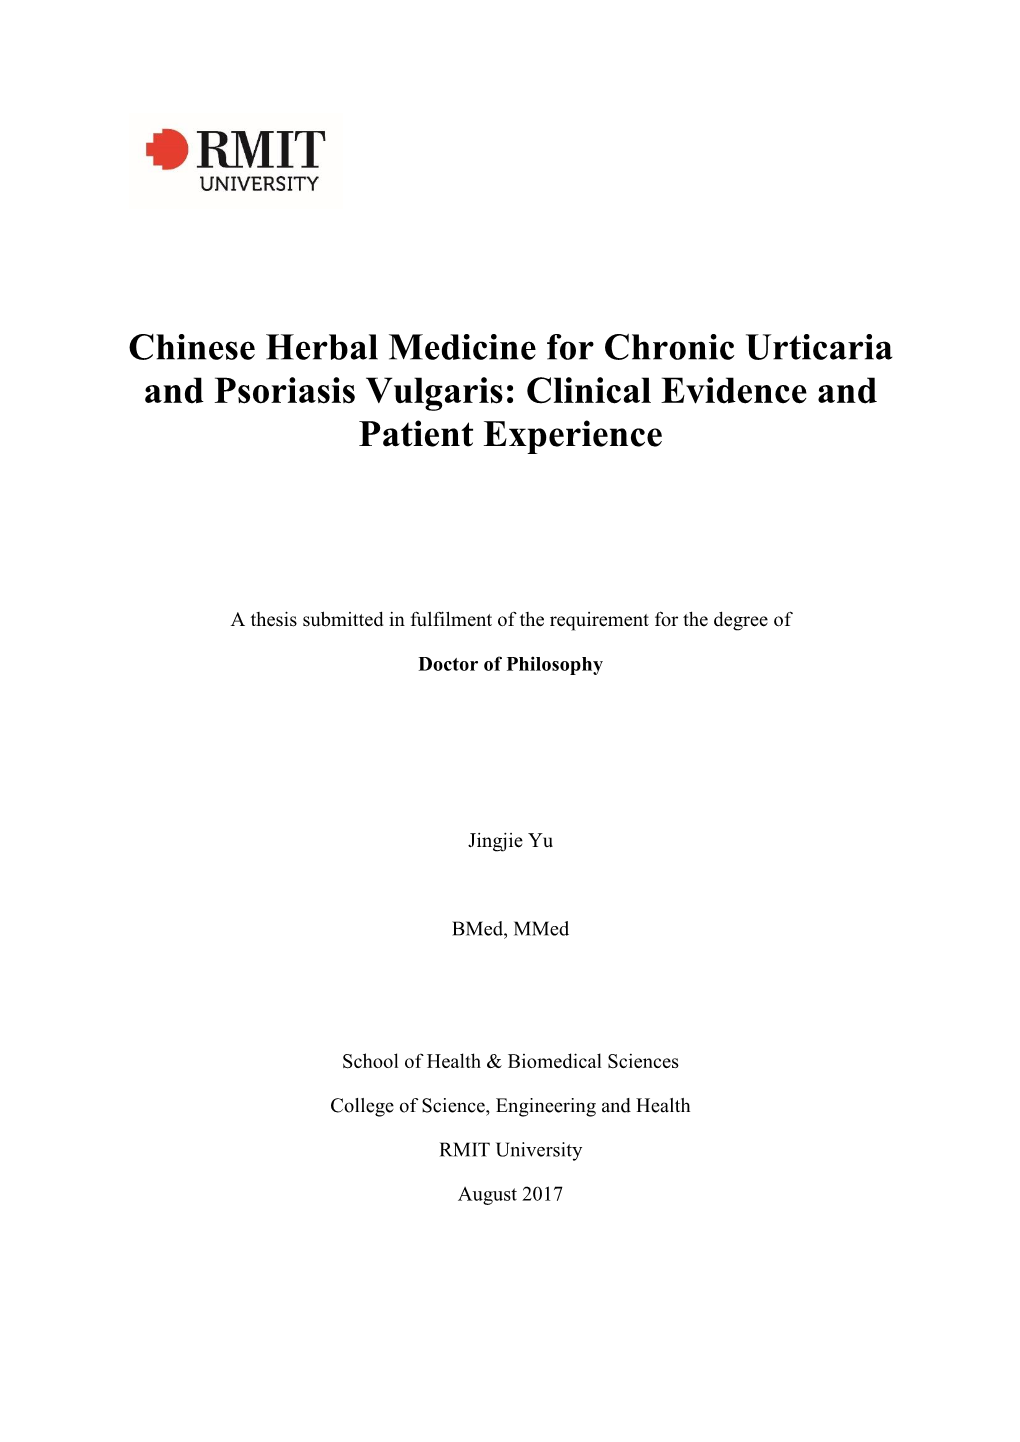 Chinese Herbal Medicine for Chronic Urticaria and Psoriasis Vulgaris: Clinical Evidence and Patient Experience